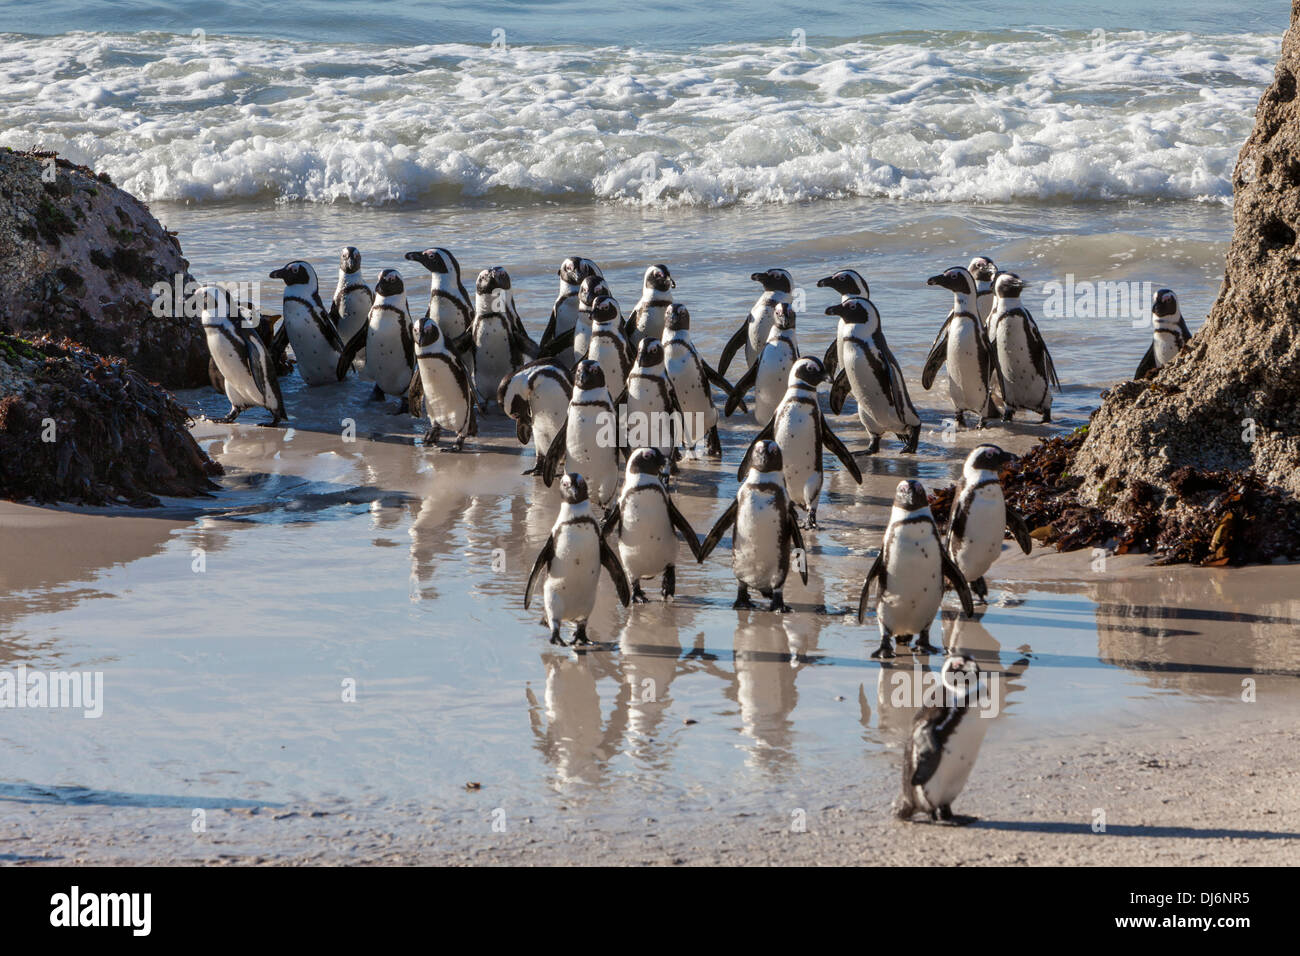 South Africa. African Penguins at Boulders Beach, near Simon's Town, Western Cape Province. Stock Photo